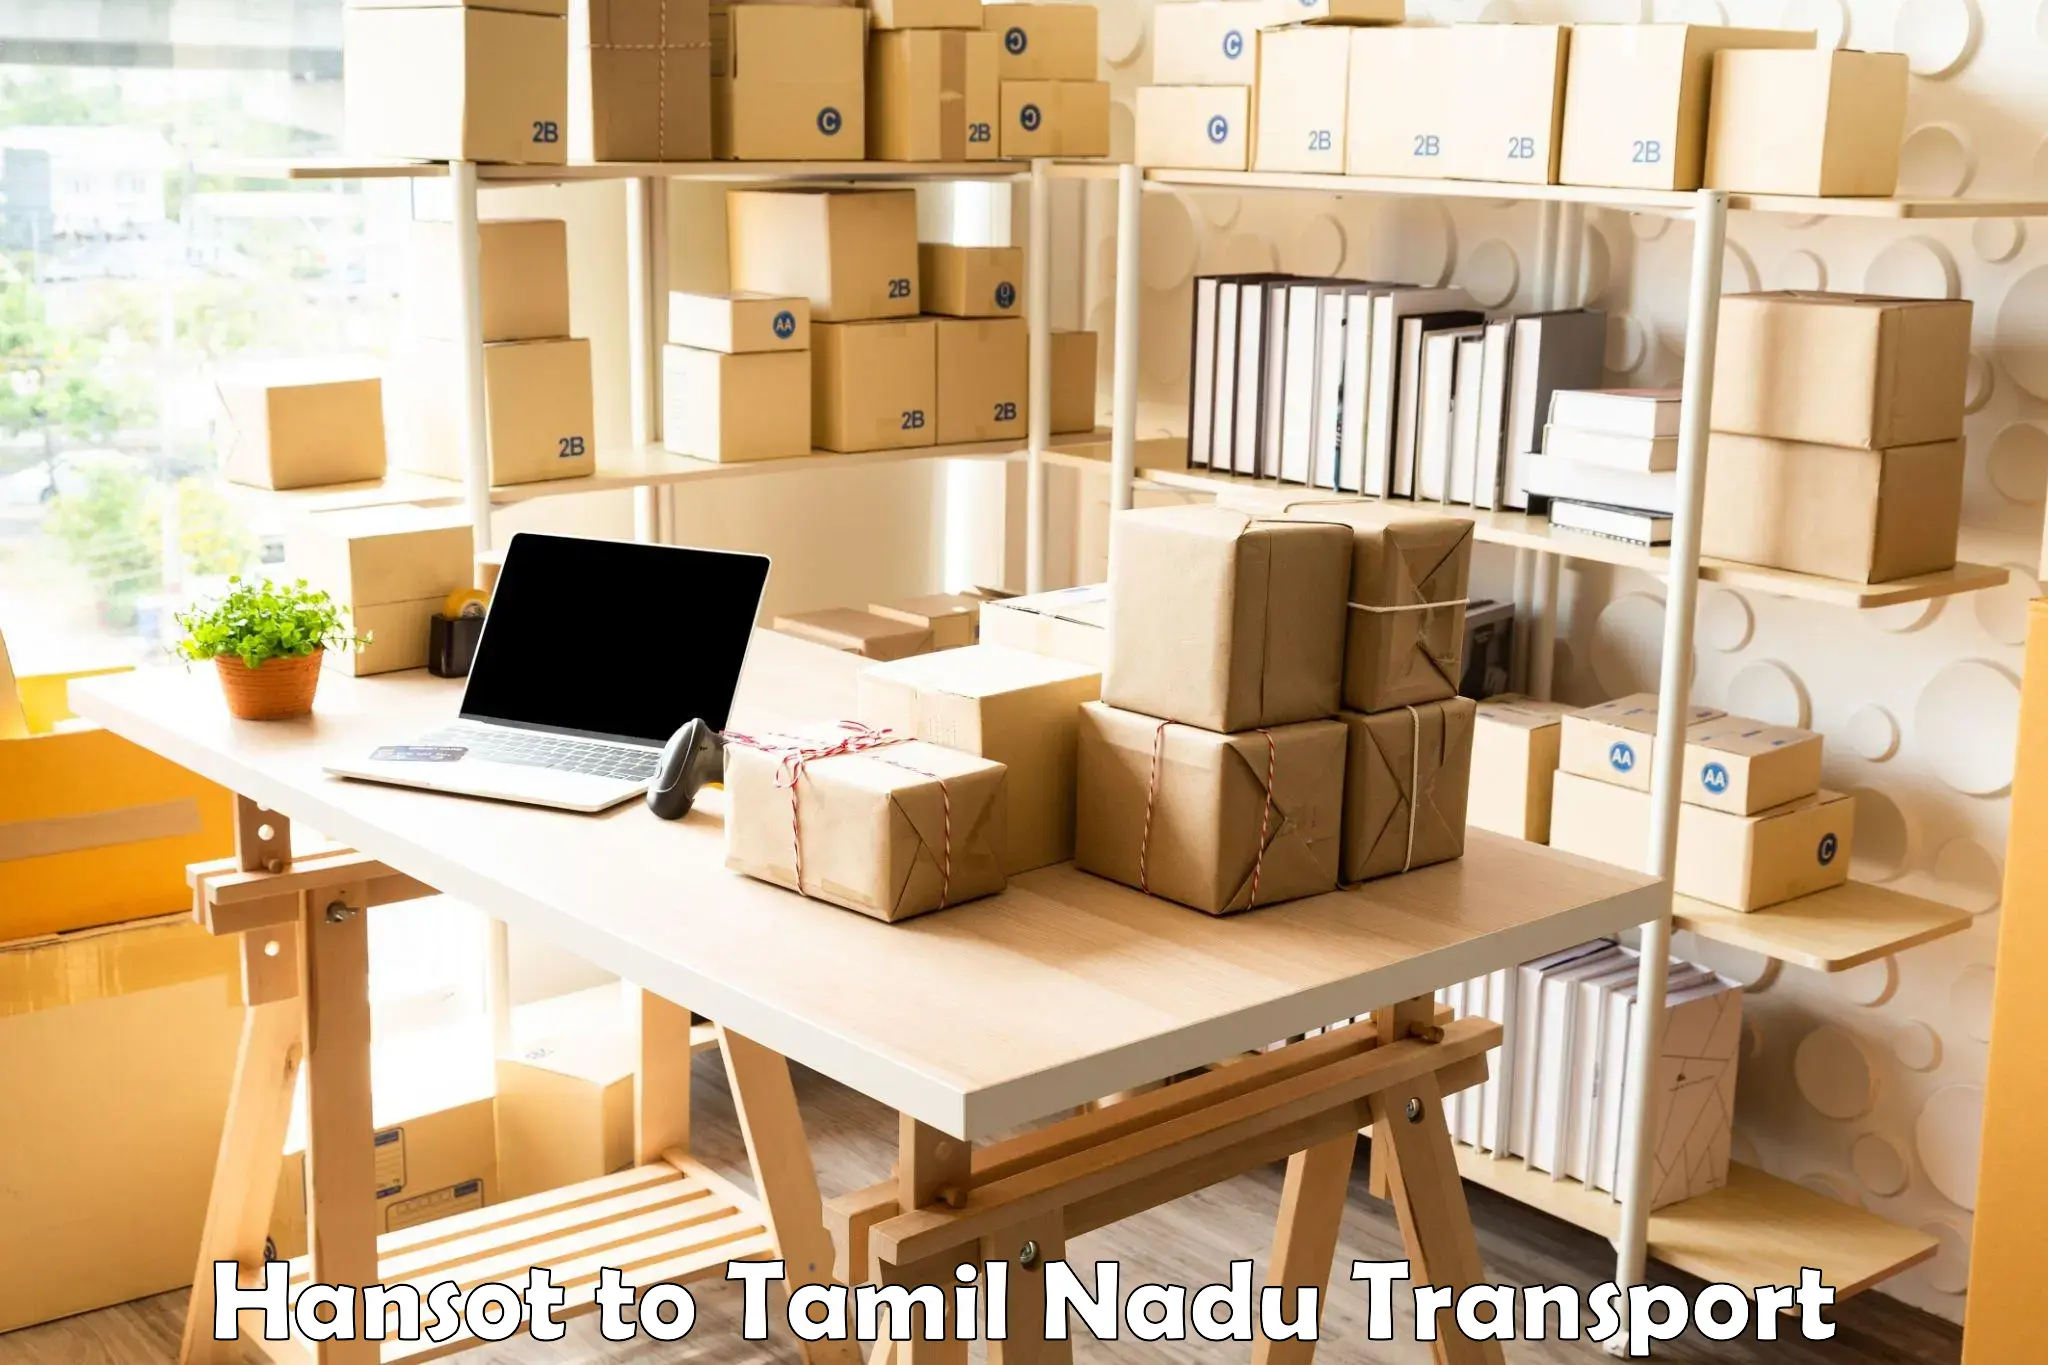 Container transport service Hansot to Ennore Port Chennai